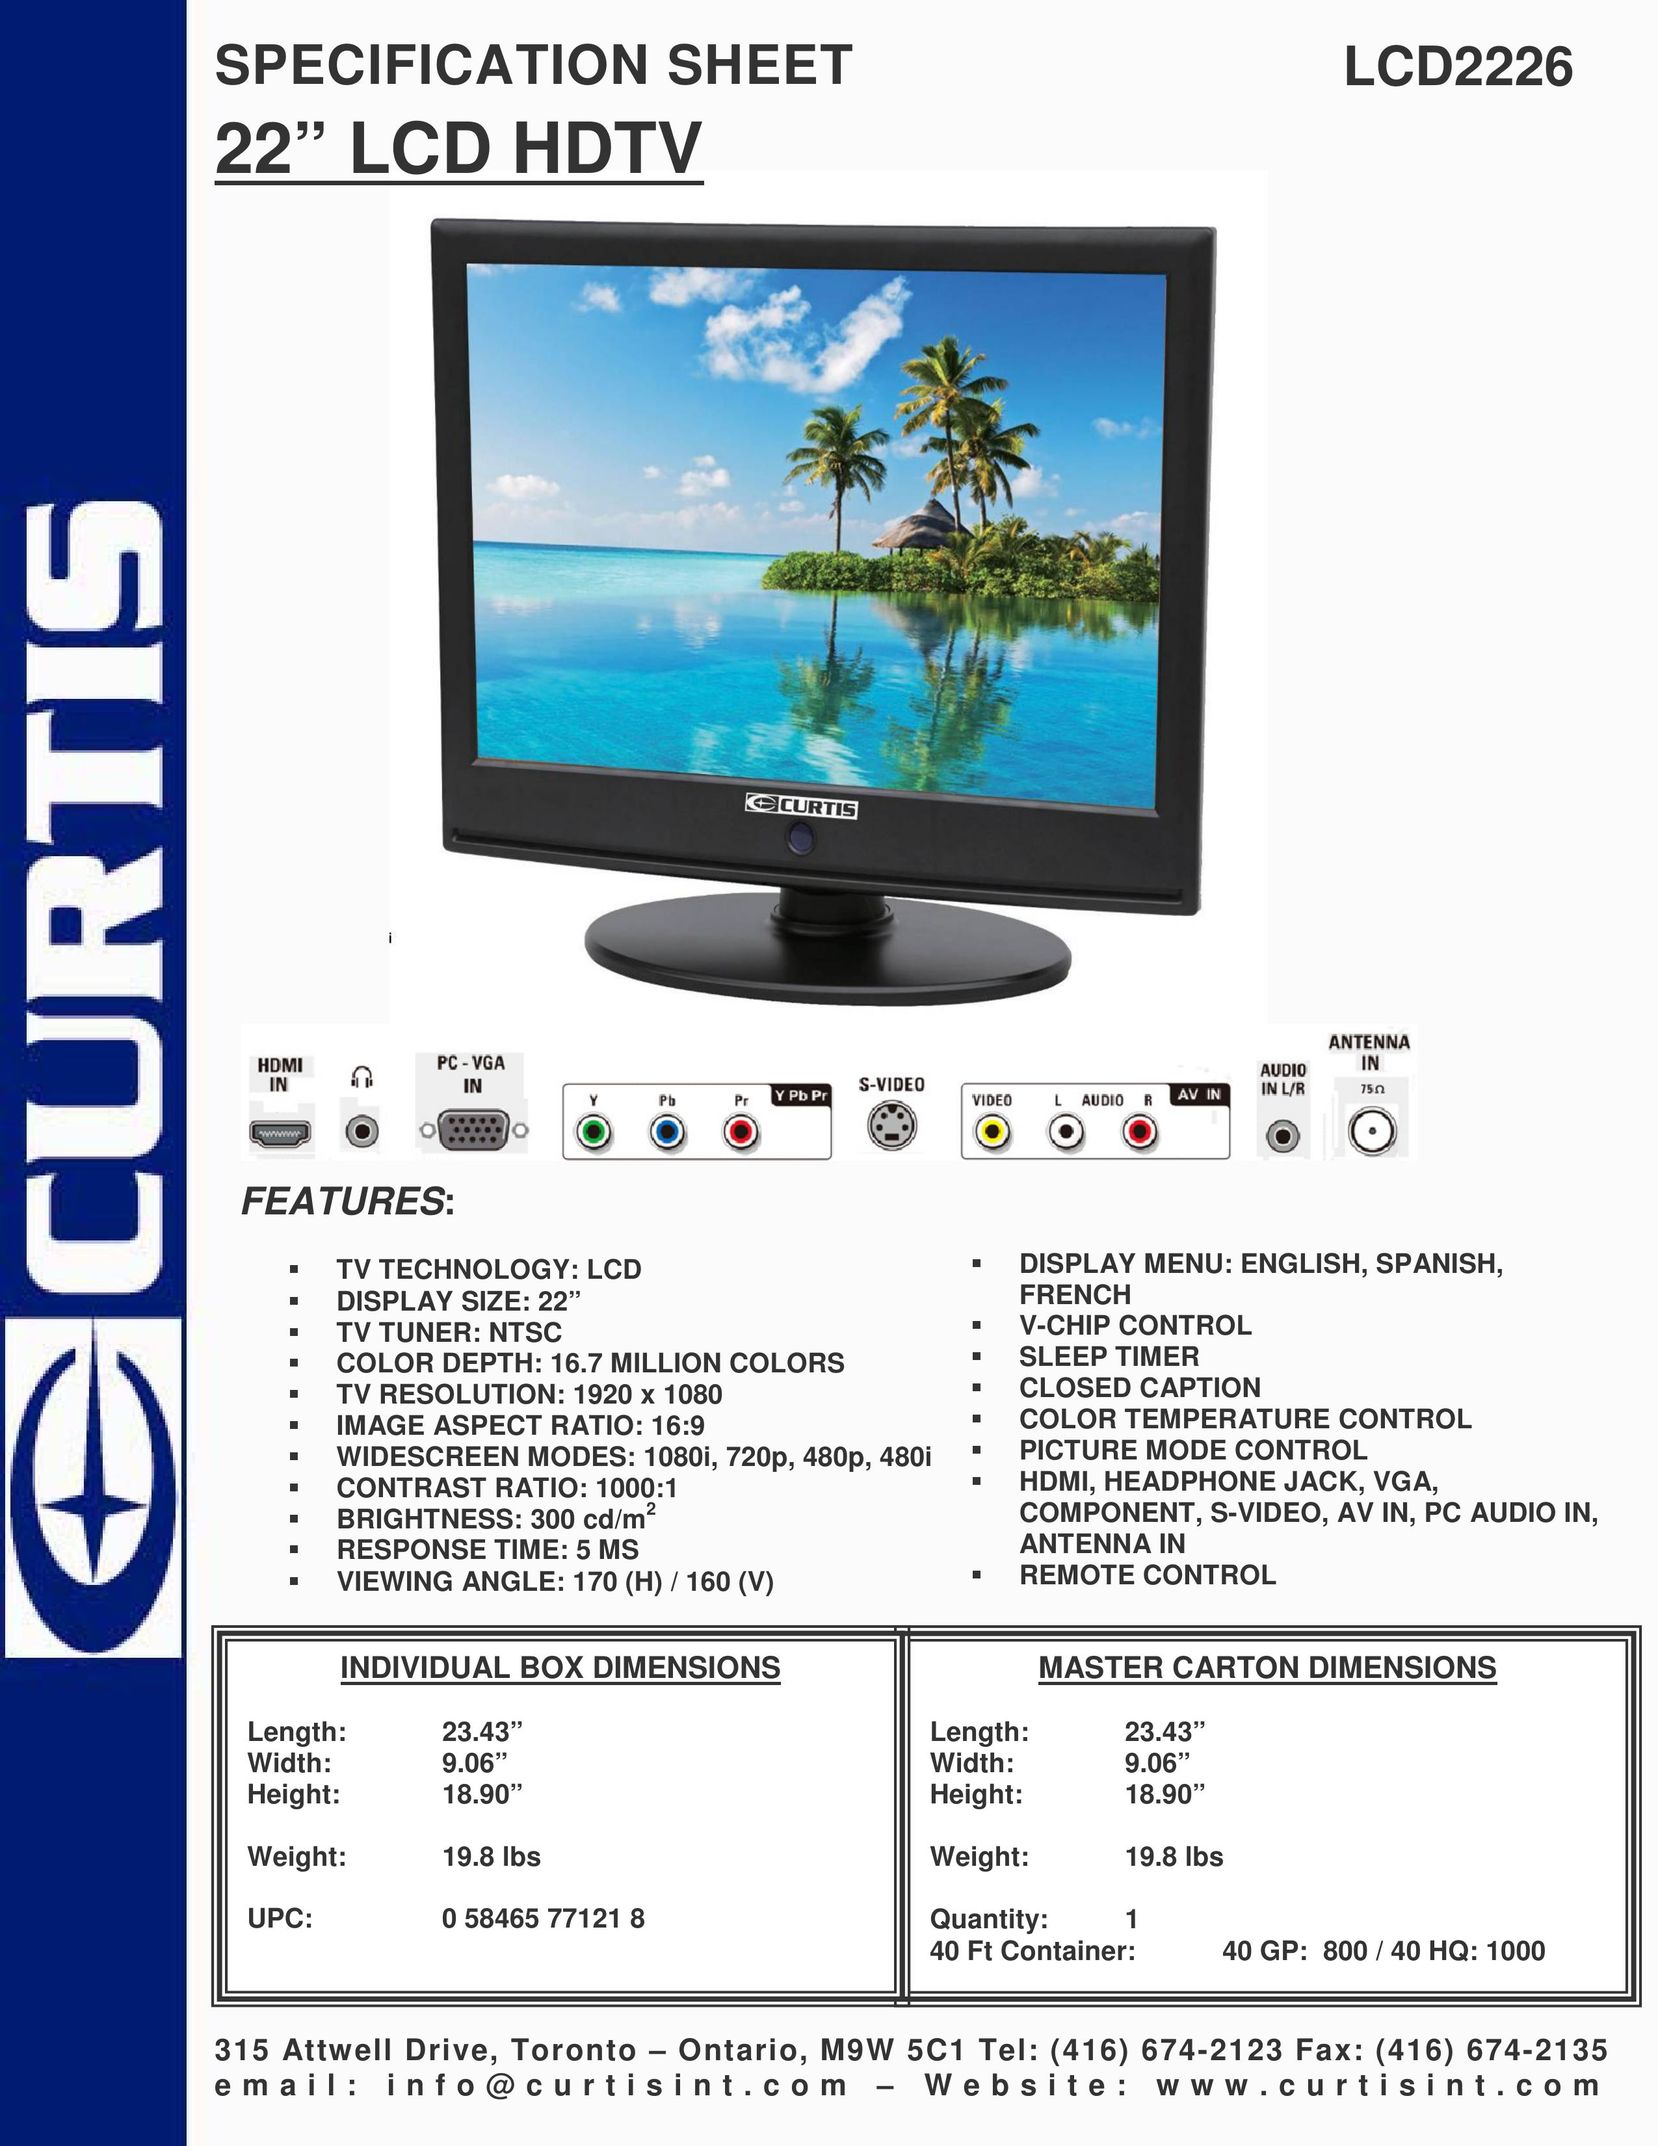 Curtis LCD2226 Flat Panel Television User Manual